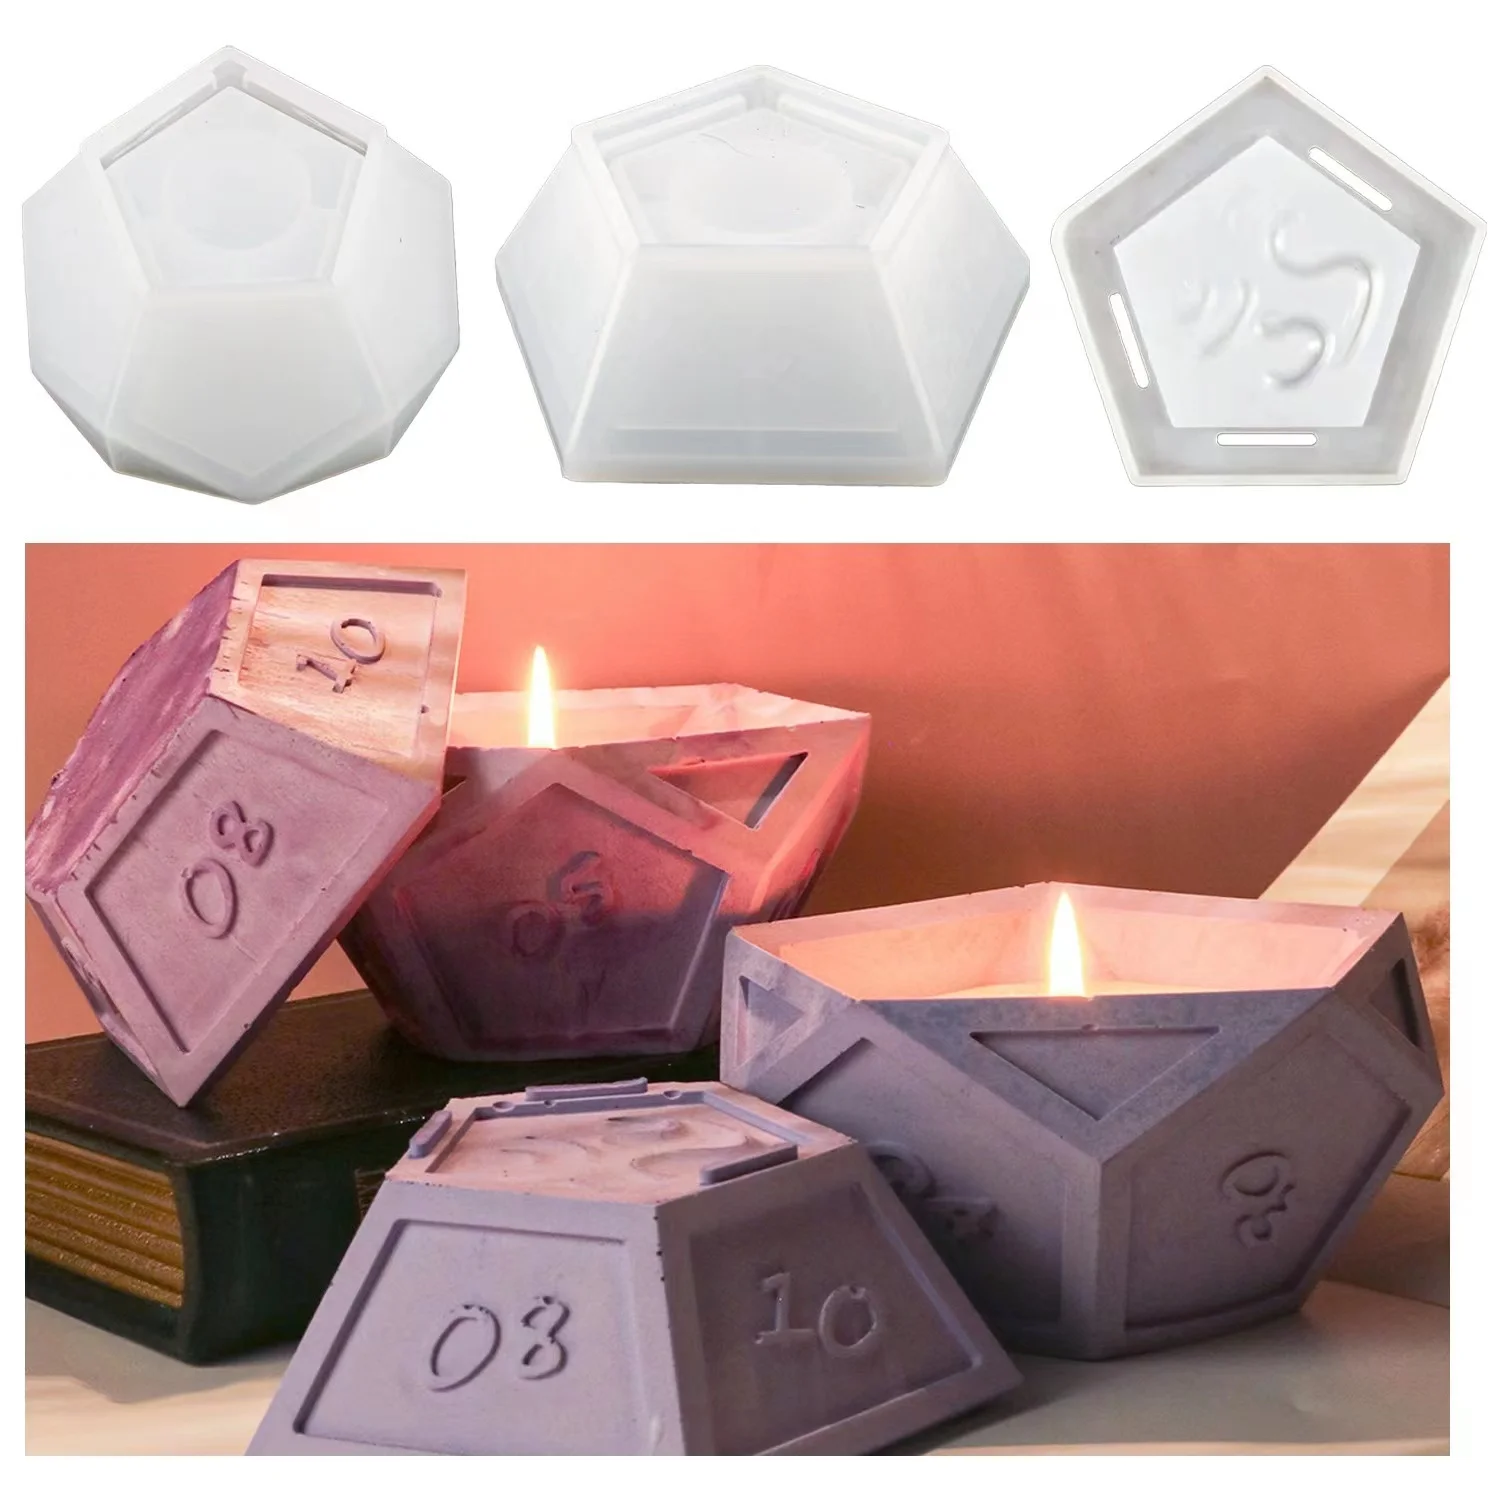 

Dice Candle Cup Silicone Mold DIY Epoxy Resin Cement Gypsum Pouring Aromatherapy Storage Mold Home Decoration Table Crafts